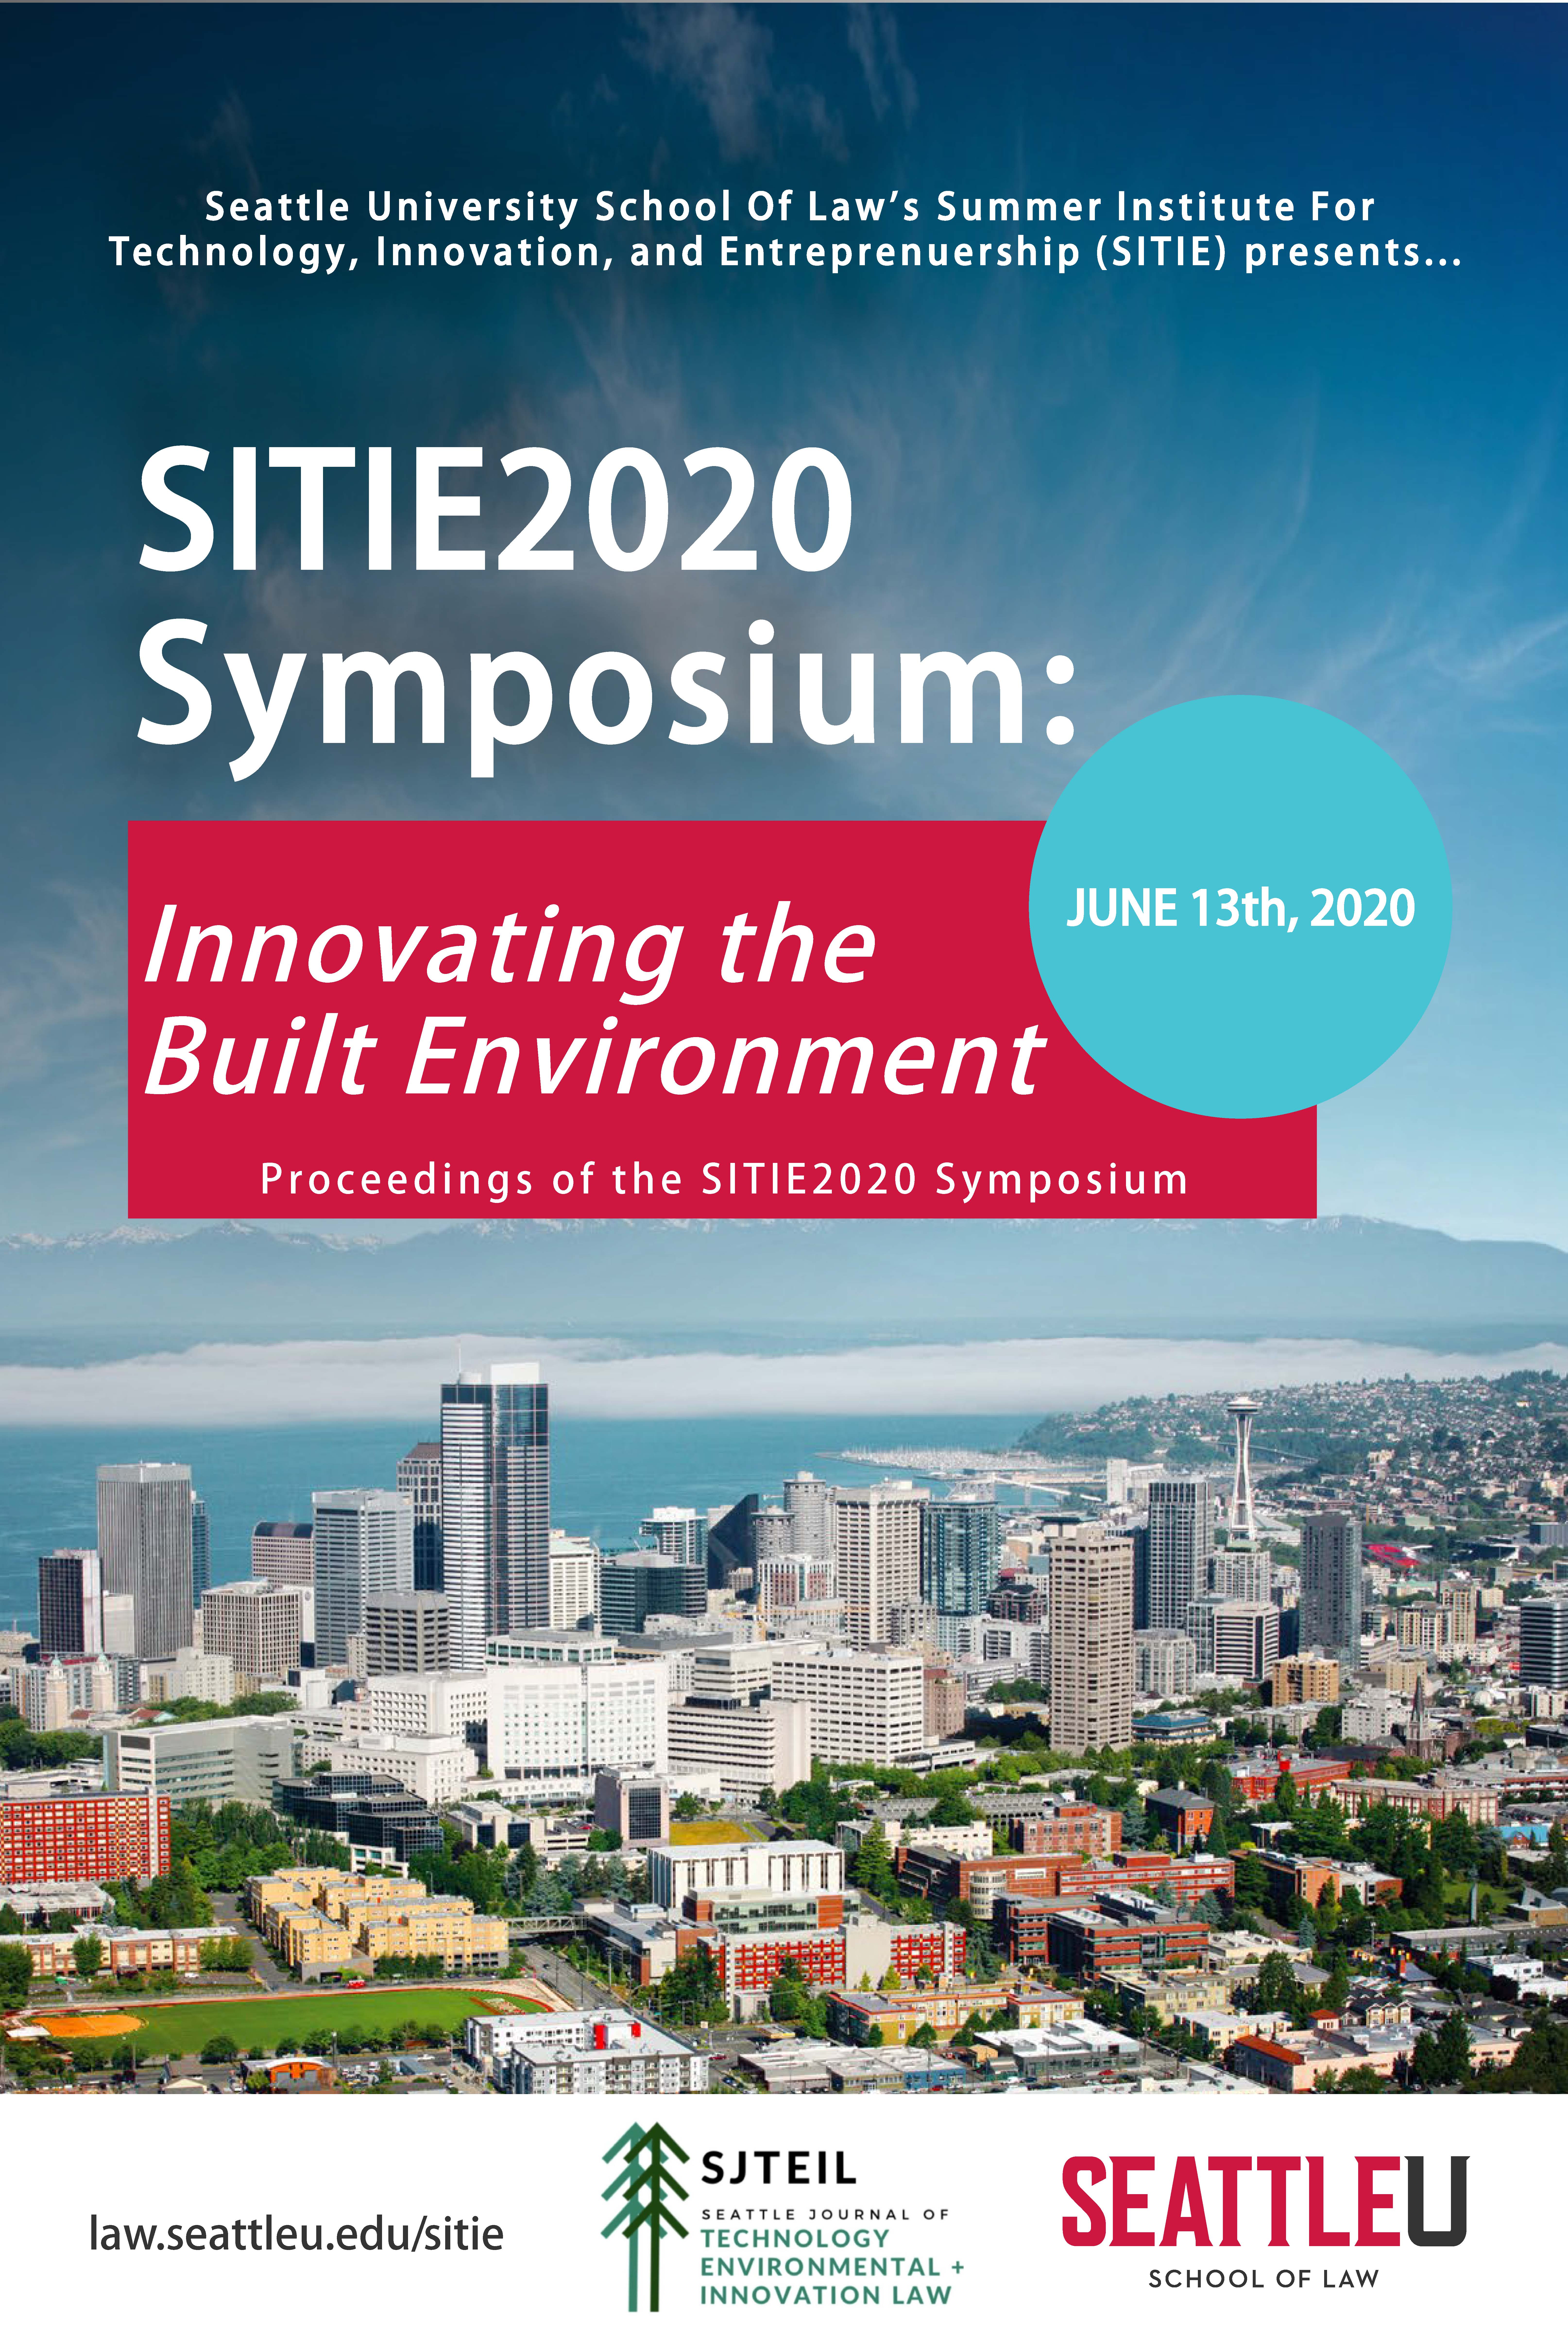 SITIE2020 Symposium: Innovating the Built Environment